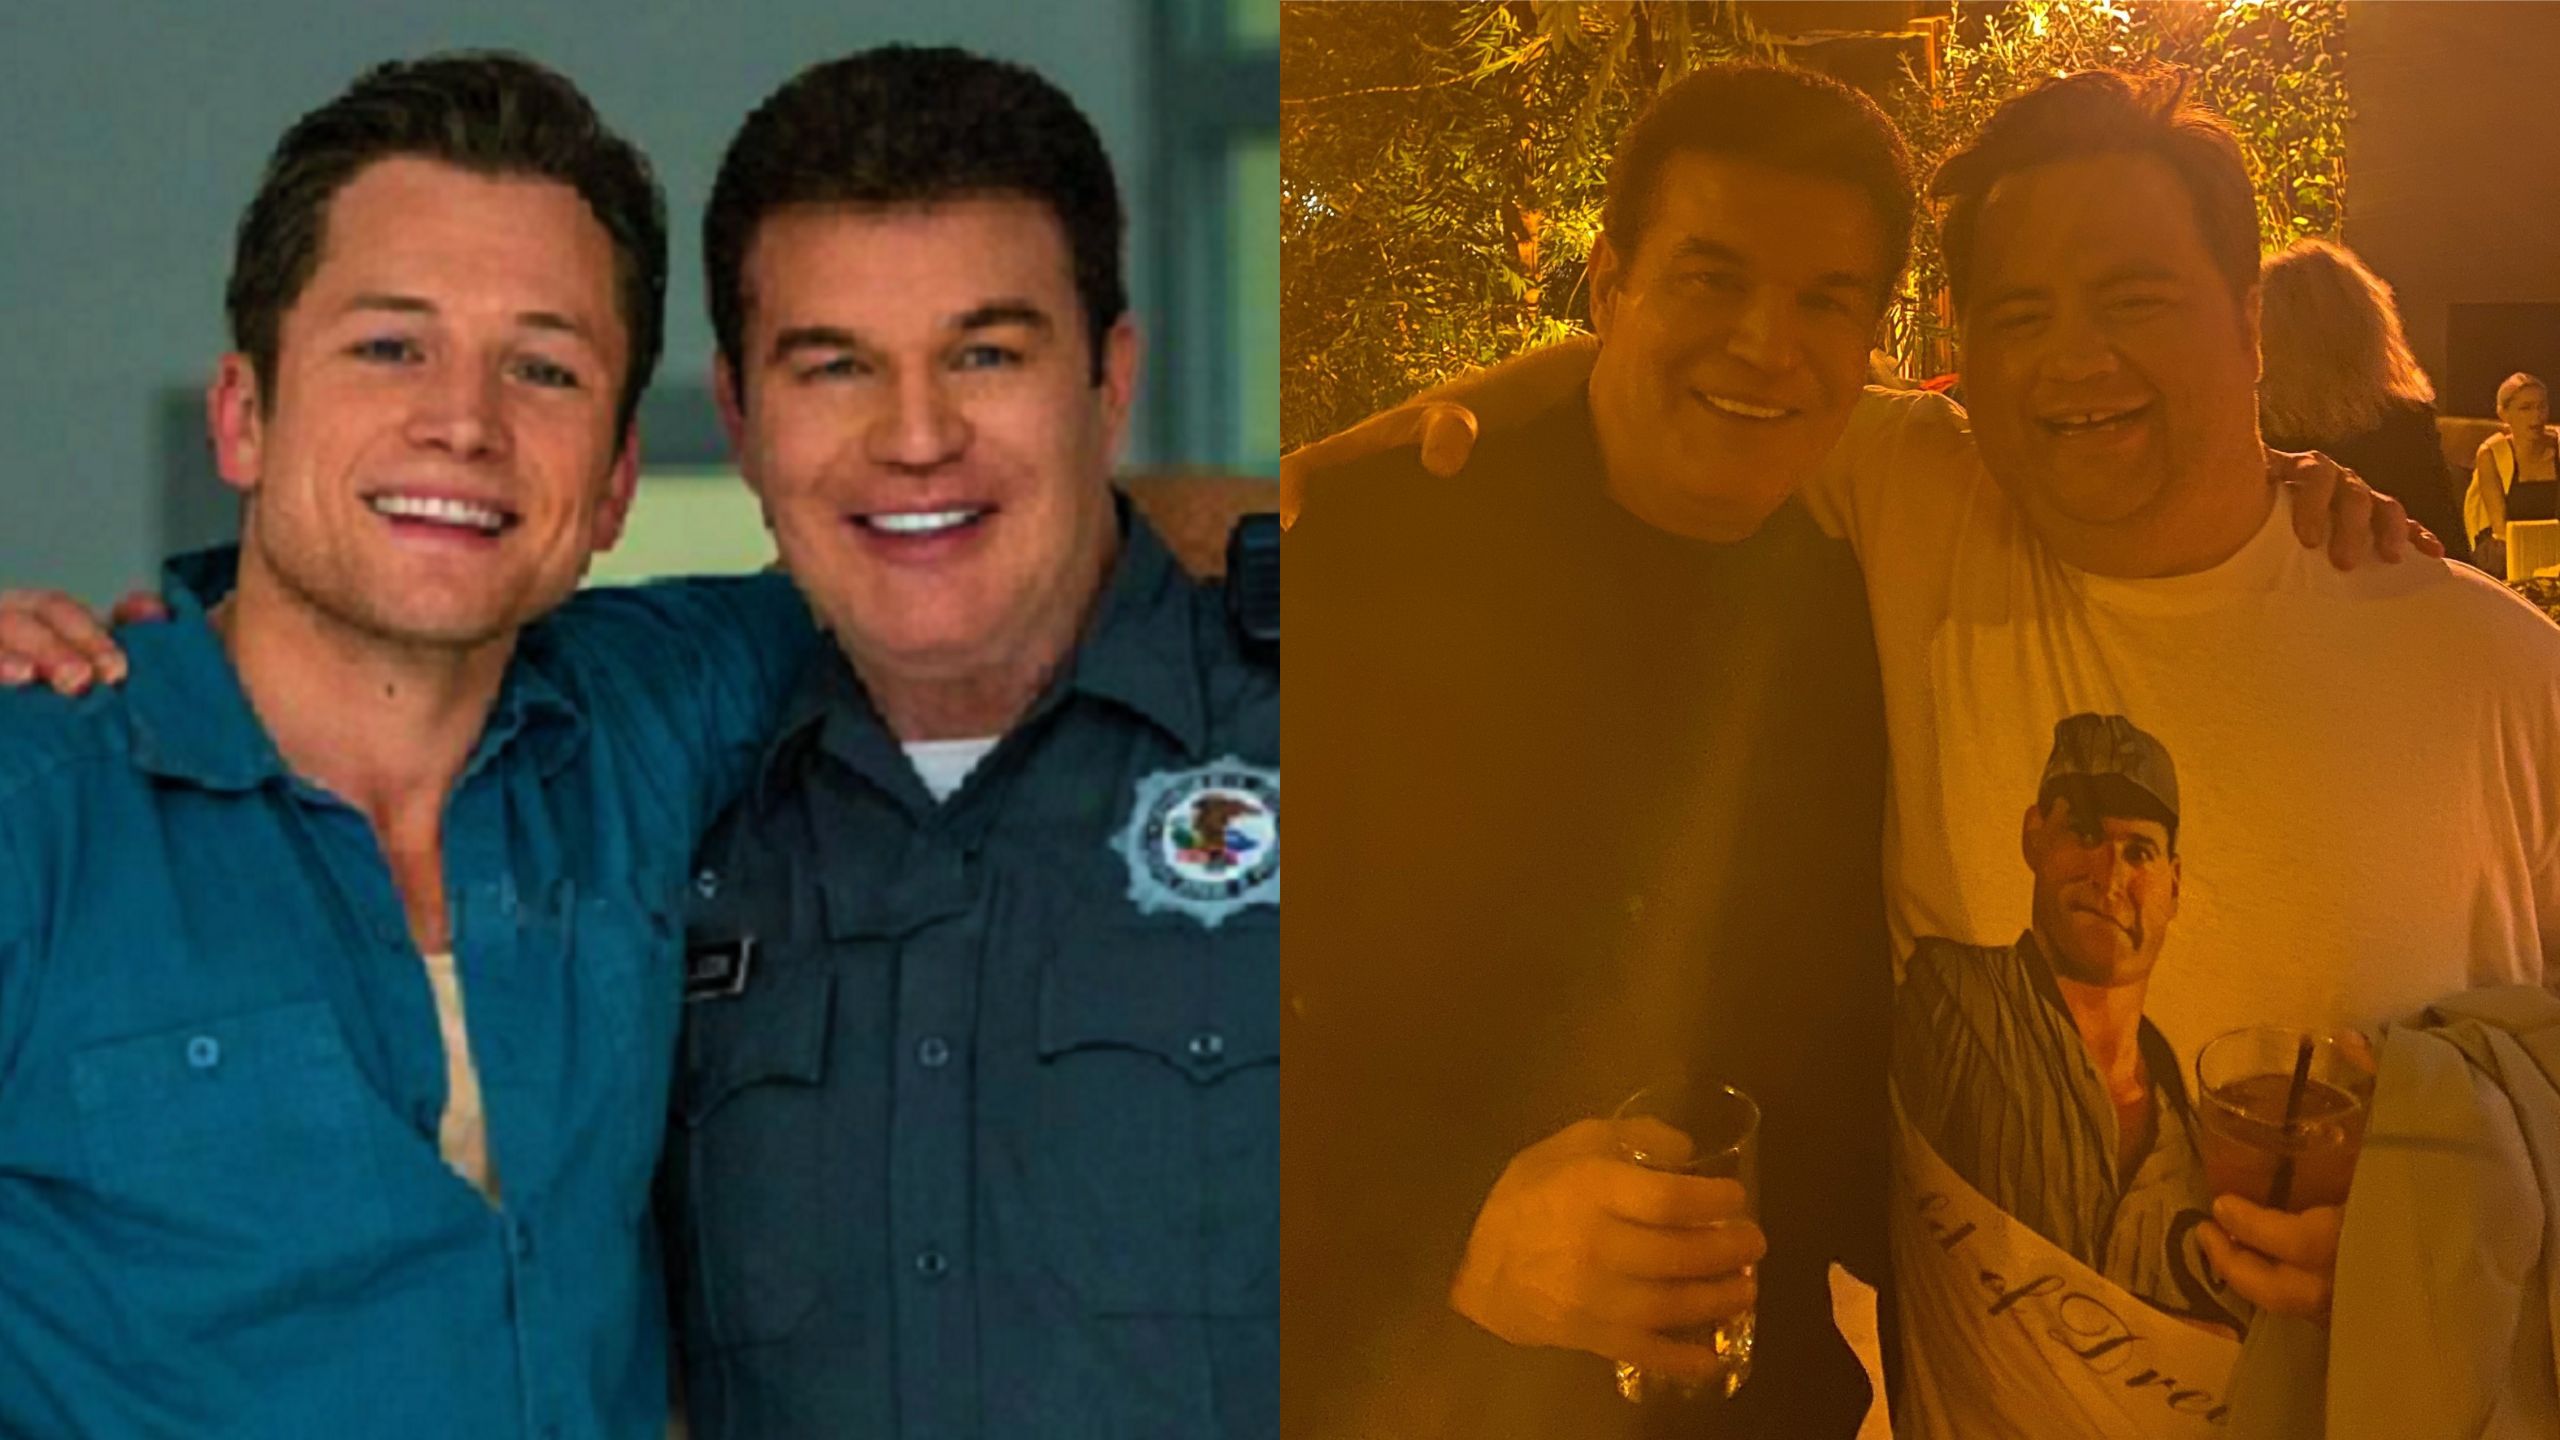 Left: Taron Egerton and James Jimmy Keen on the set of Black Bird. - Right: Jimmy Keene and Paul Walter Hauser at the Black Bird World Premiere after party